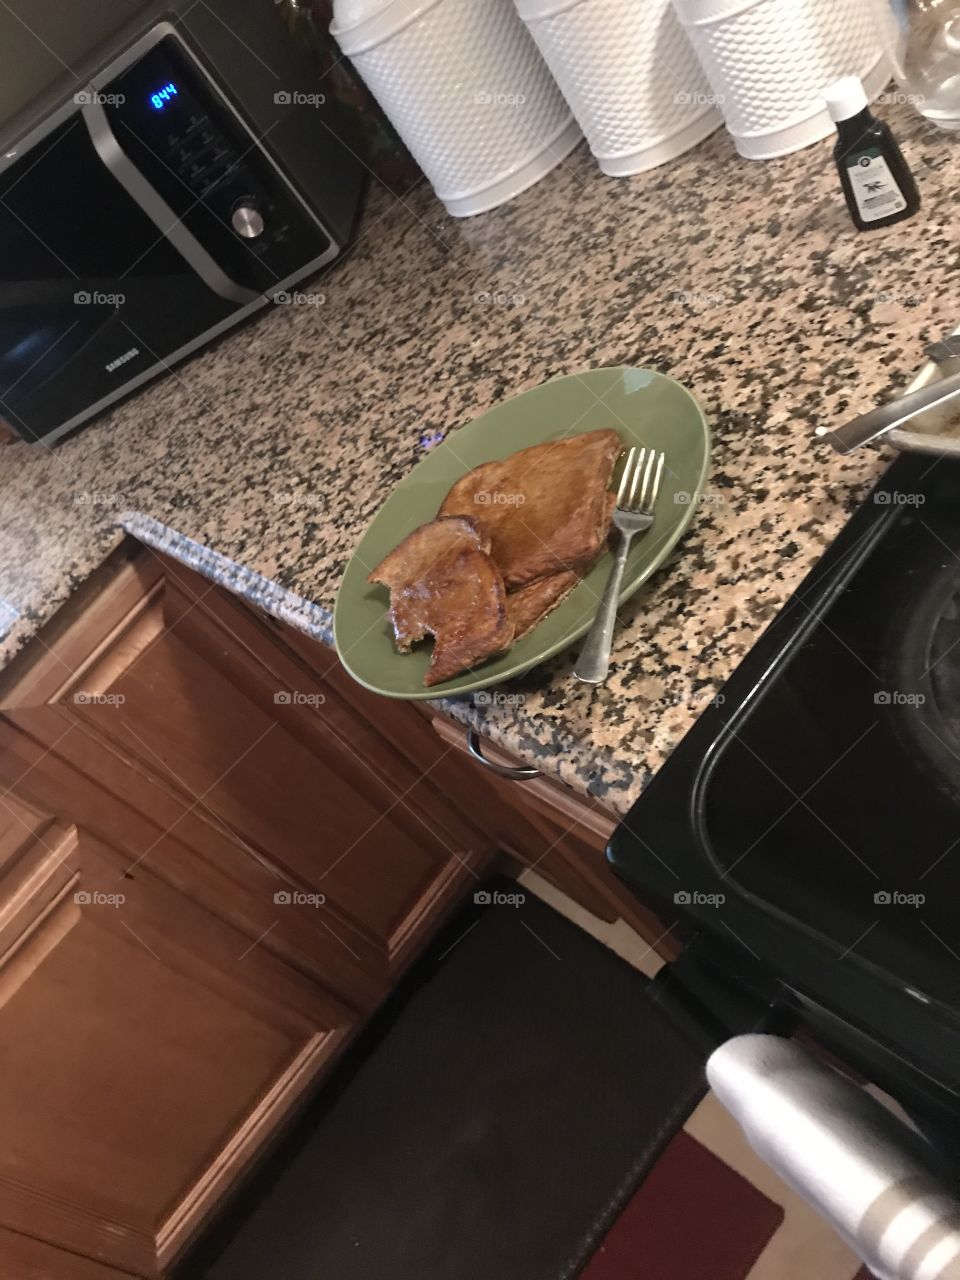 yummy french toast for breakfeast 🤤